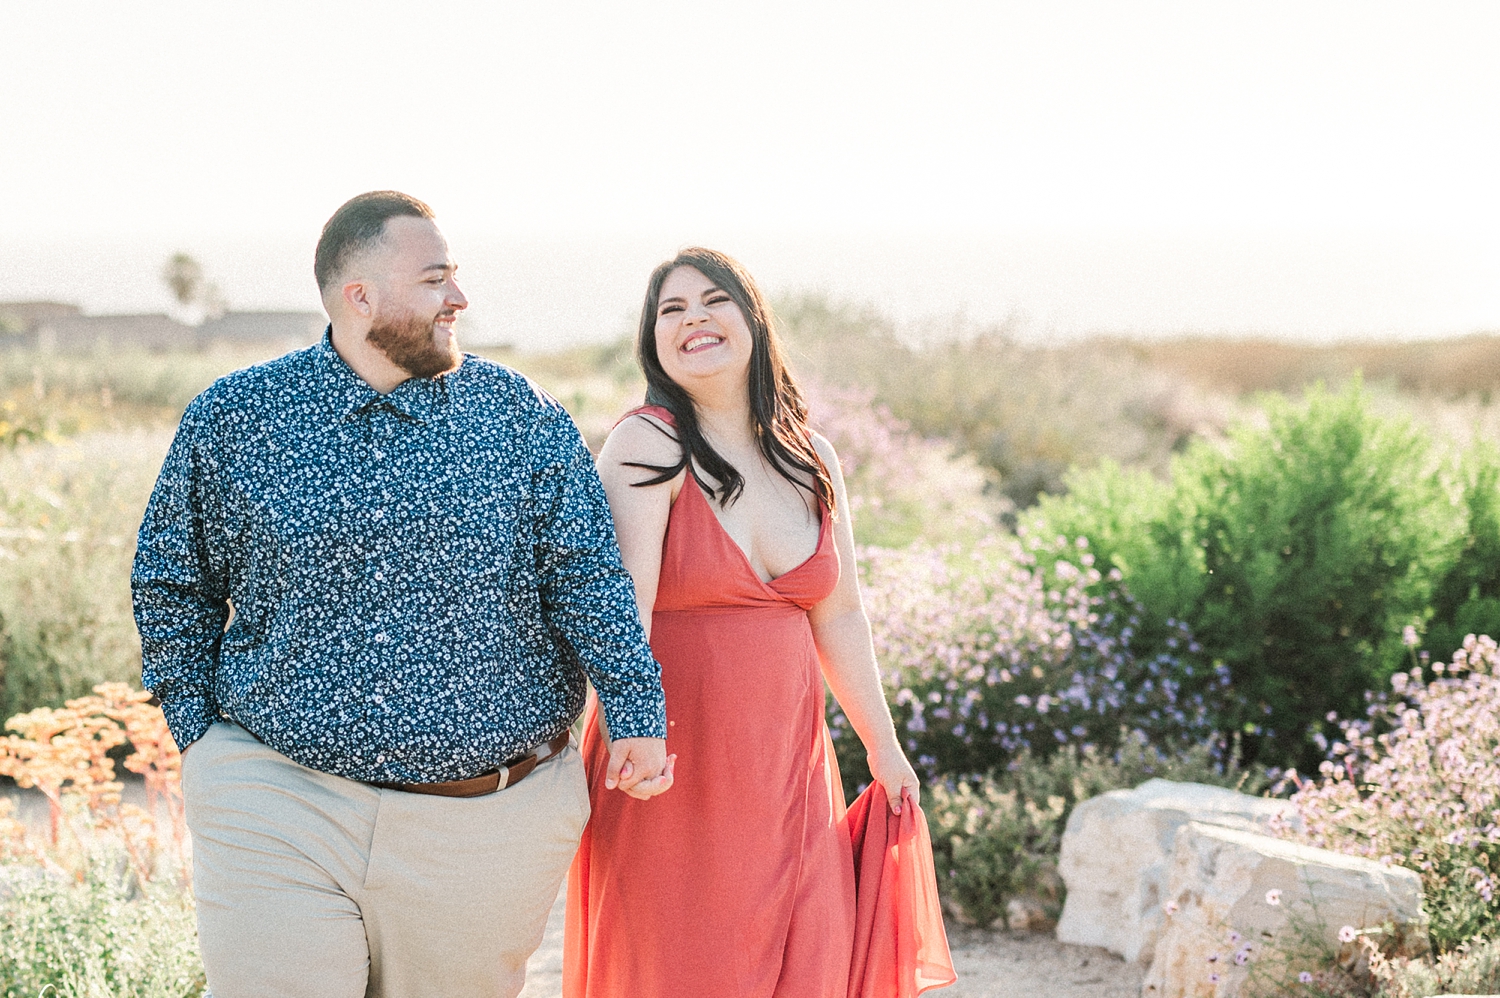 Beach Cliffs Engagement Session at Sunset | Nataly Hernandez Photography | Edwin and Susana-25.jpg